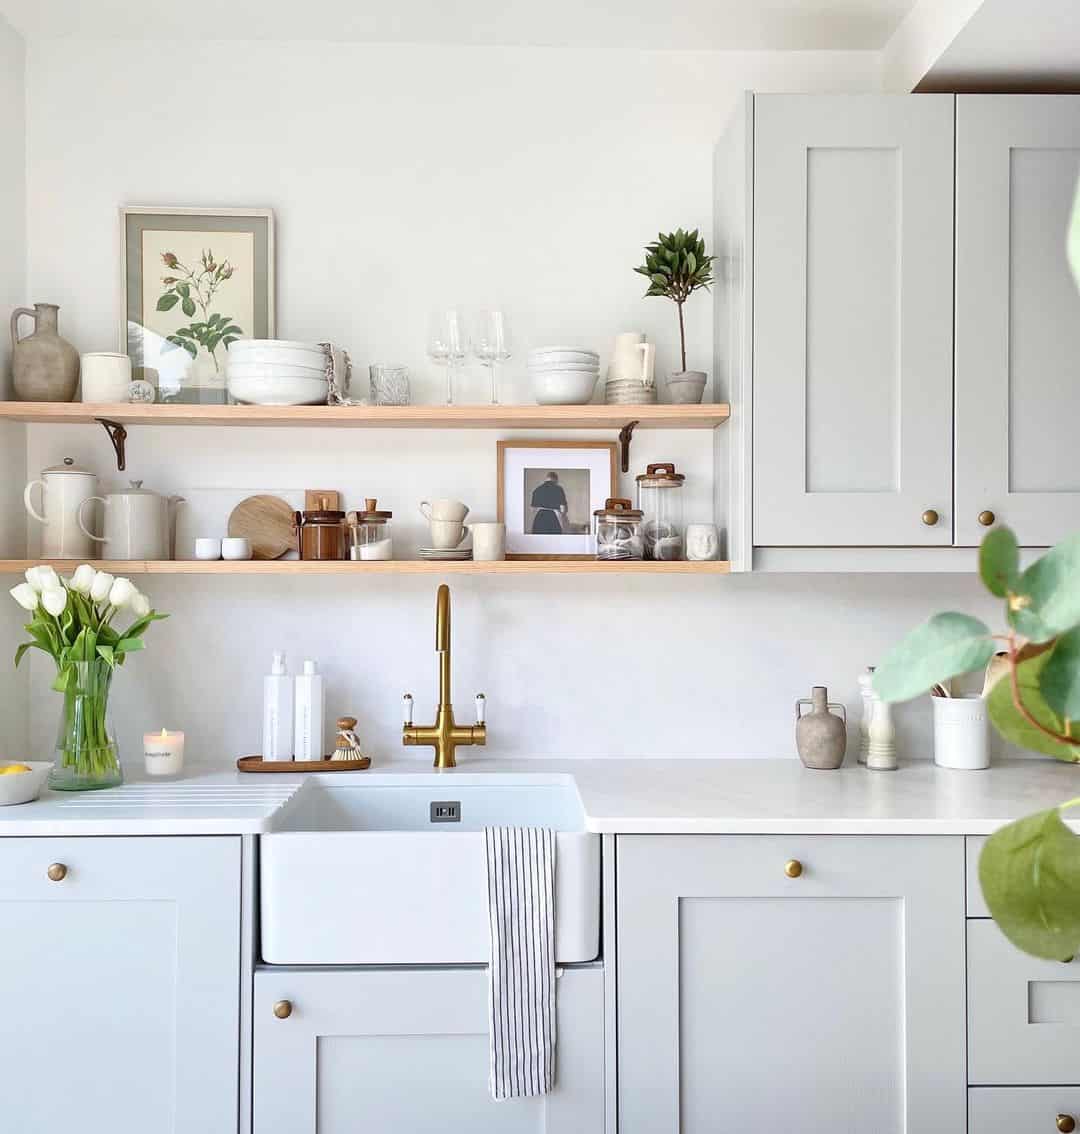 Functional Shelving Above the Sink - Soul & Lane